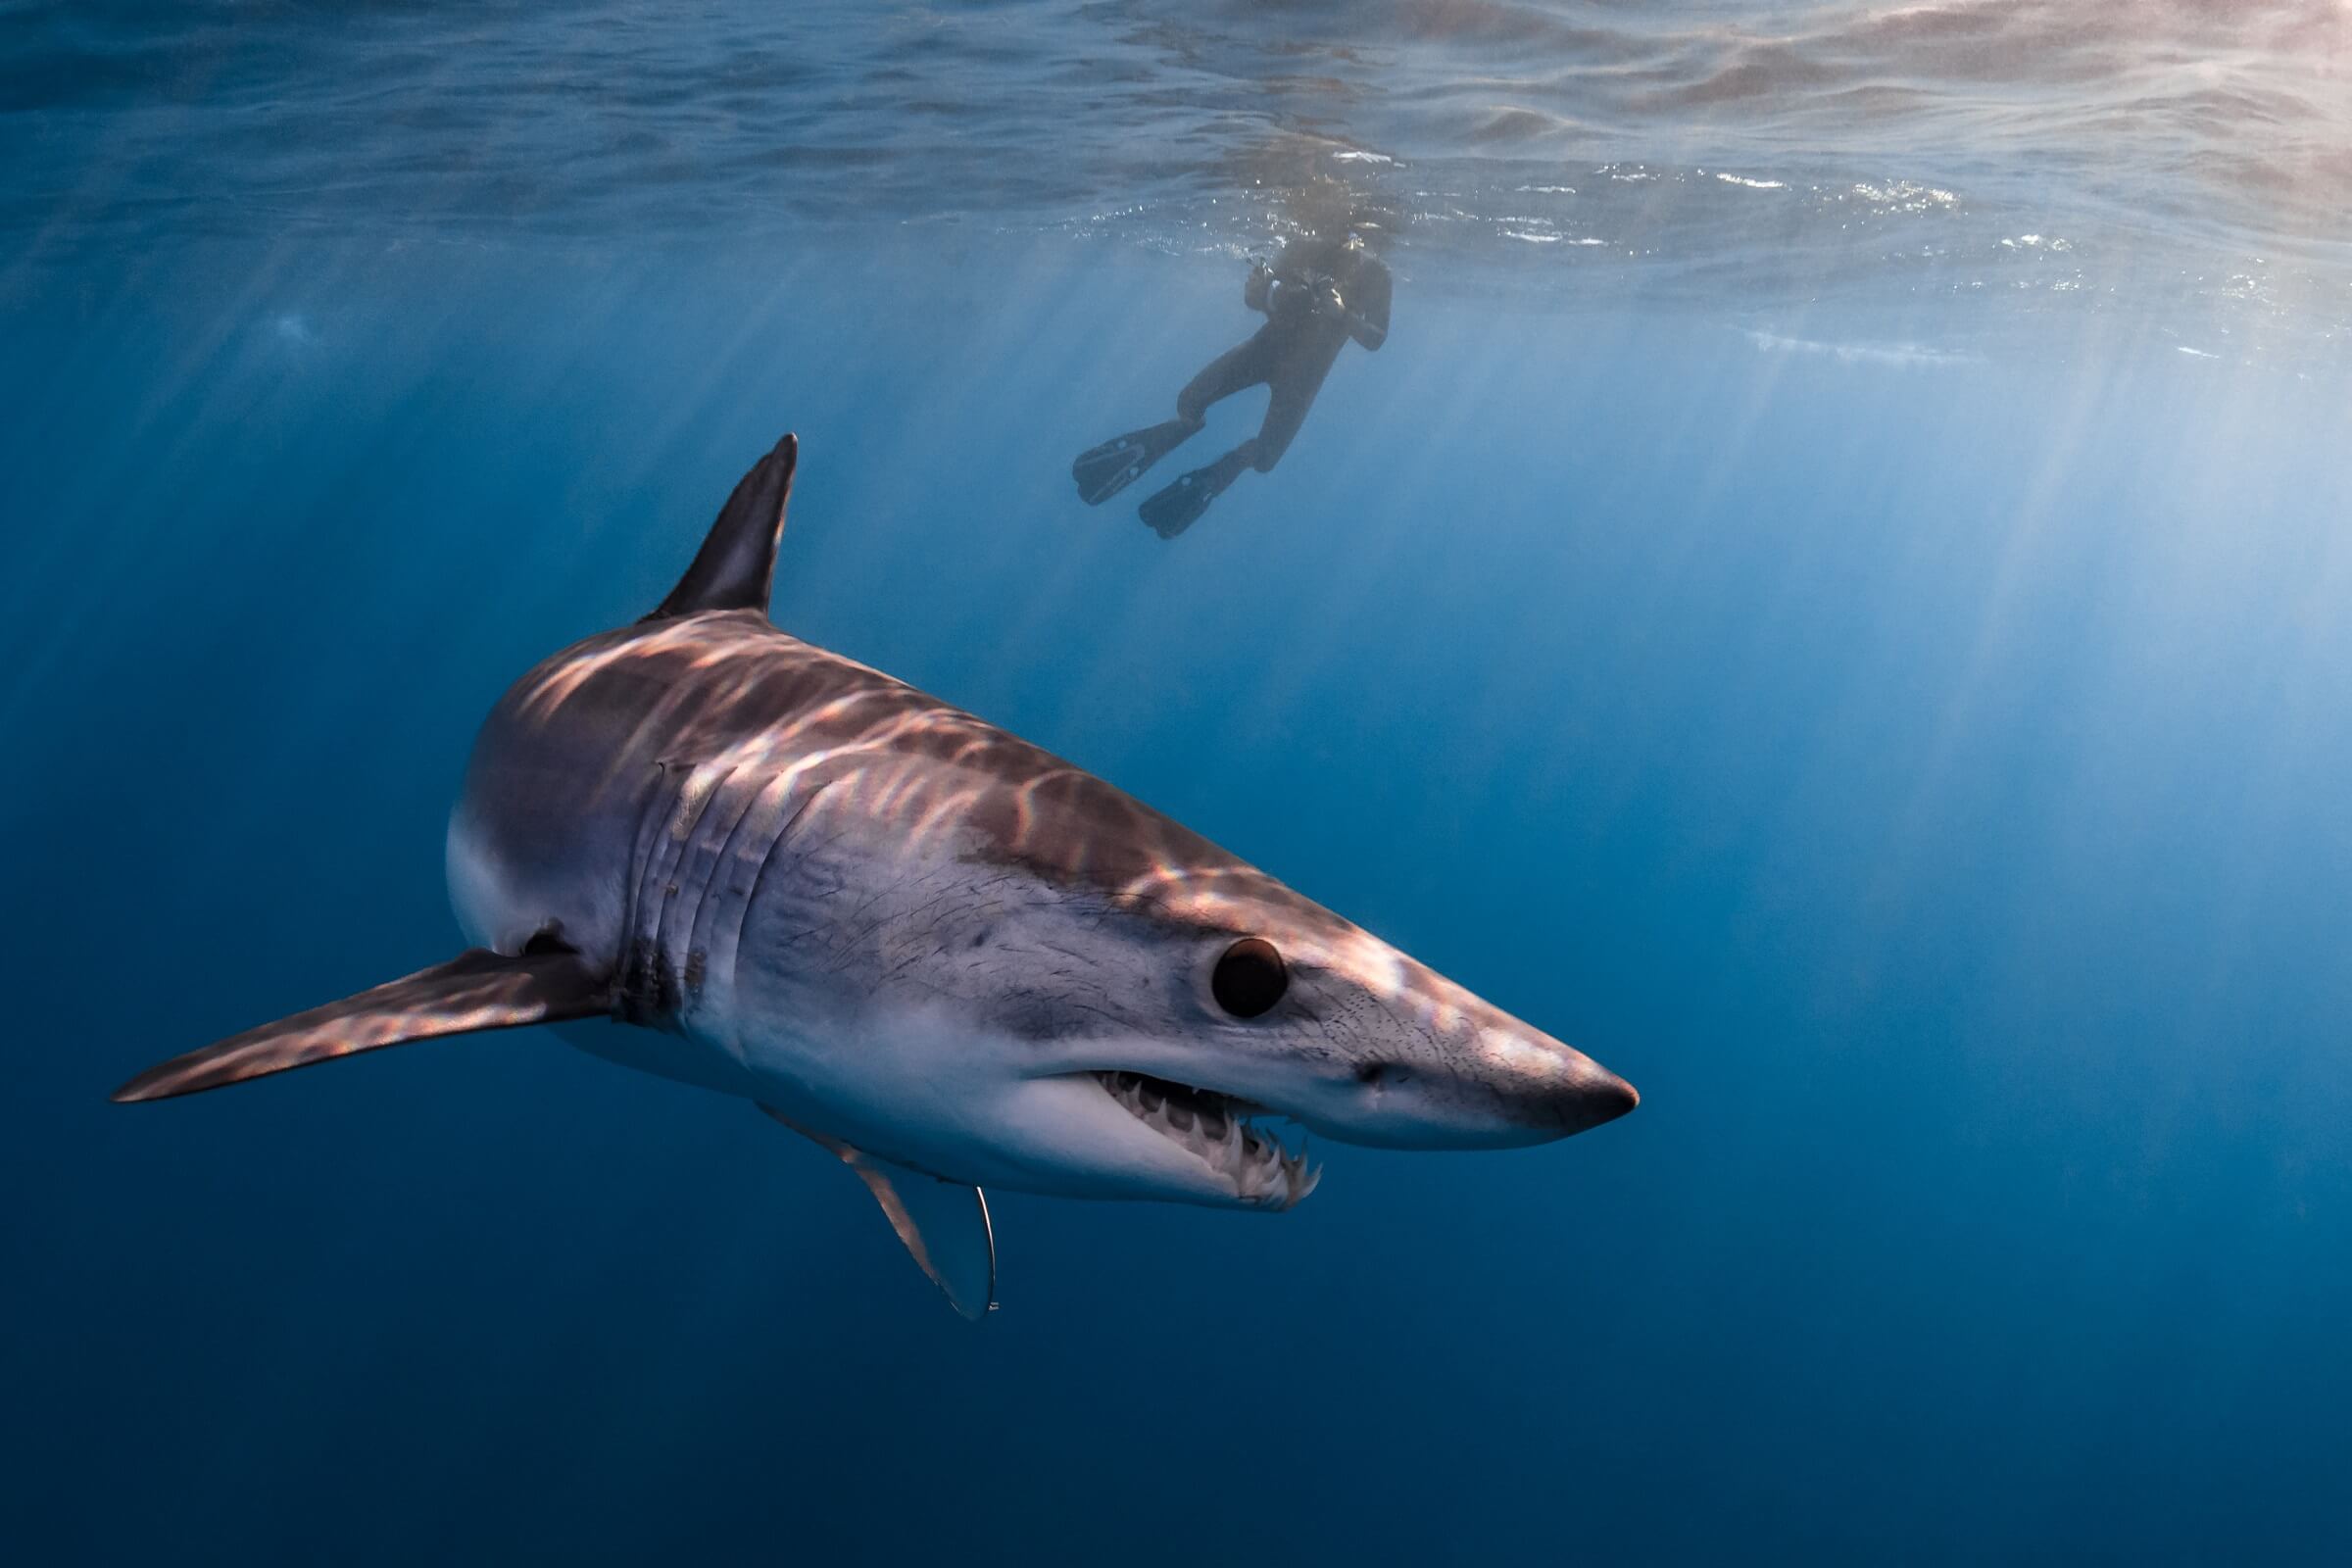 A two-year fishing ban may help reverse the decline in the shortfin mako  shark population